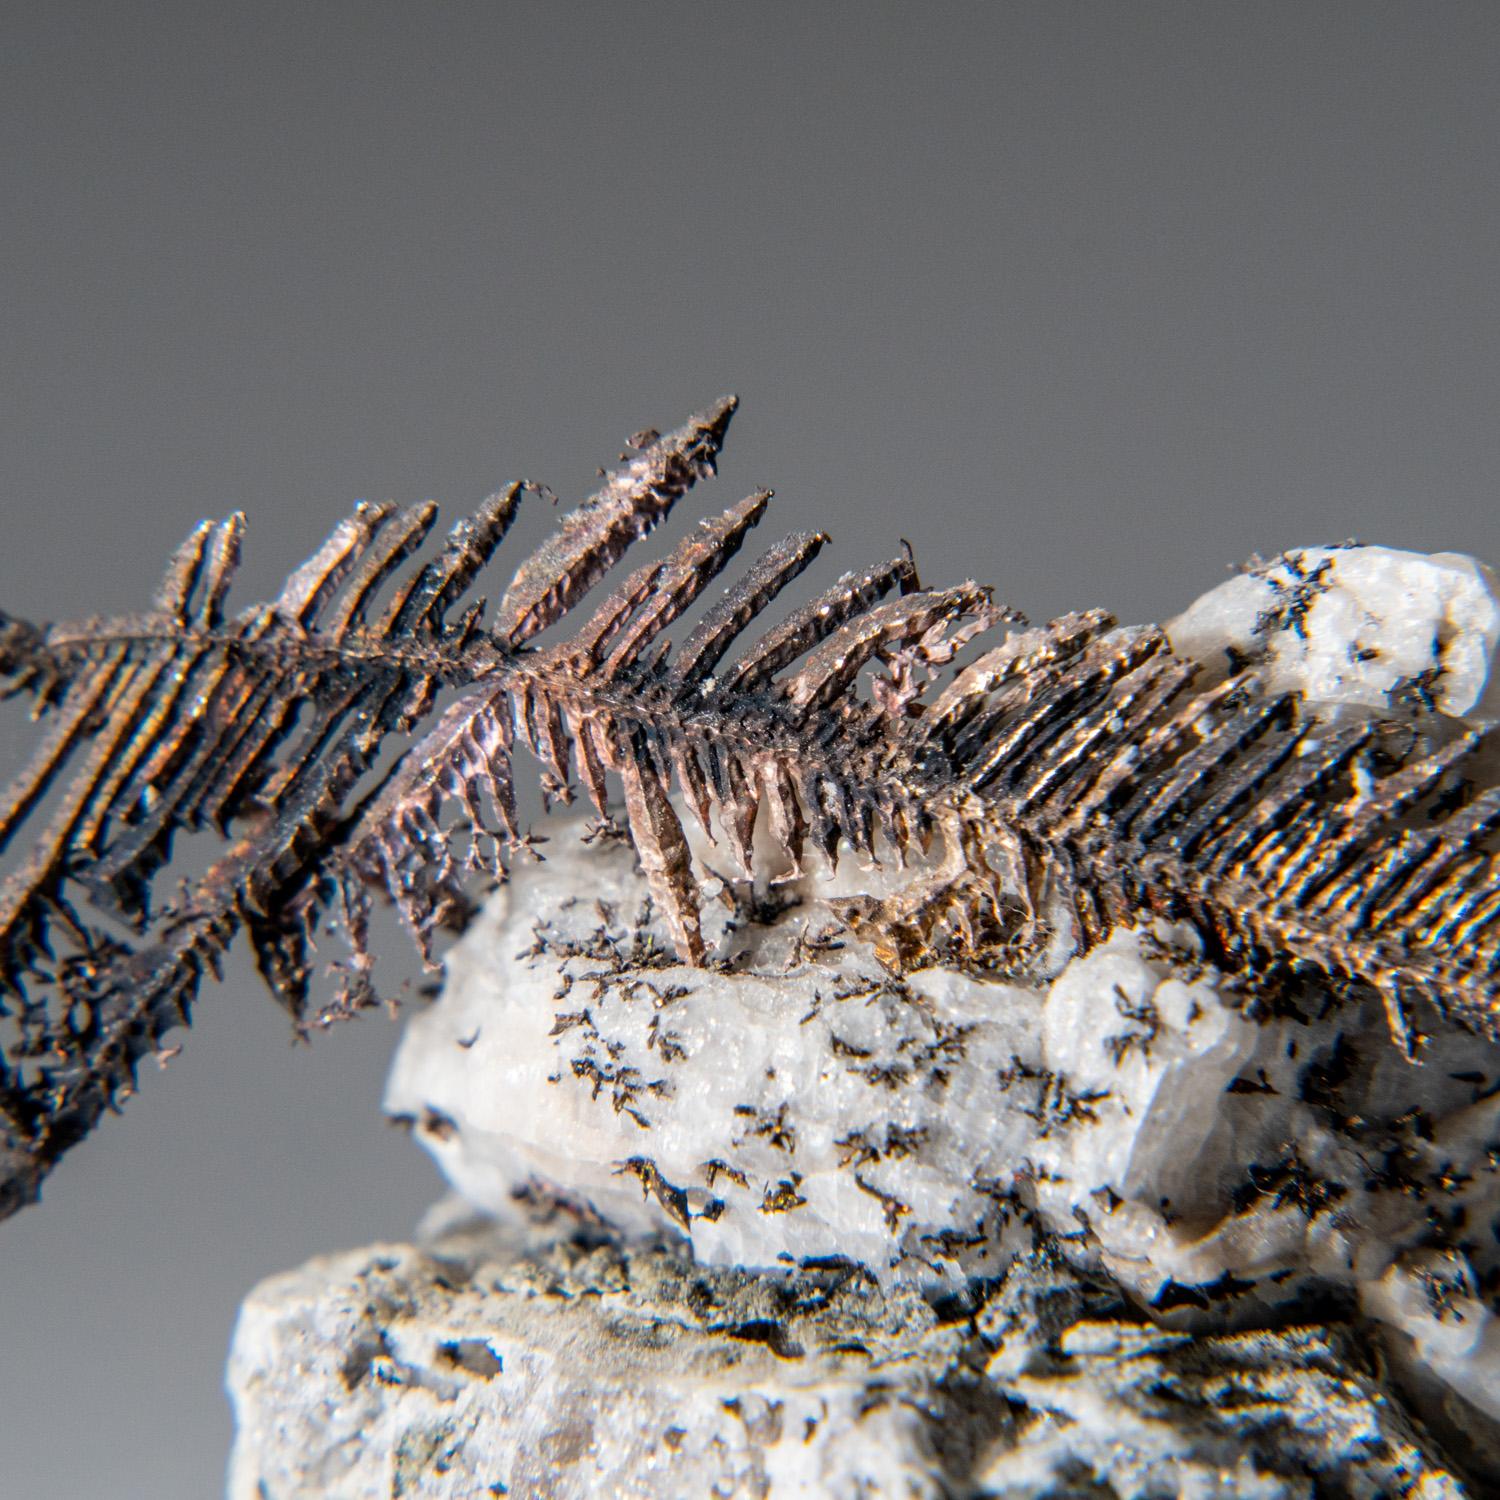 From Xiaoqinggou, Datong, Shanxi, China

This beautiful Silver from the New Nevada Mine Batopilas Chihuahua Mexico is a one-of-a-kind specimen. Its sculptural formation features twisted wire-crystals of native silver, making it an eye-catching